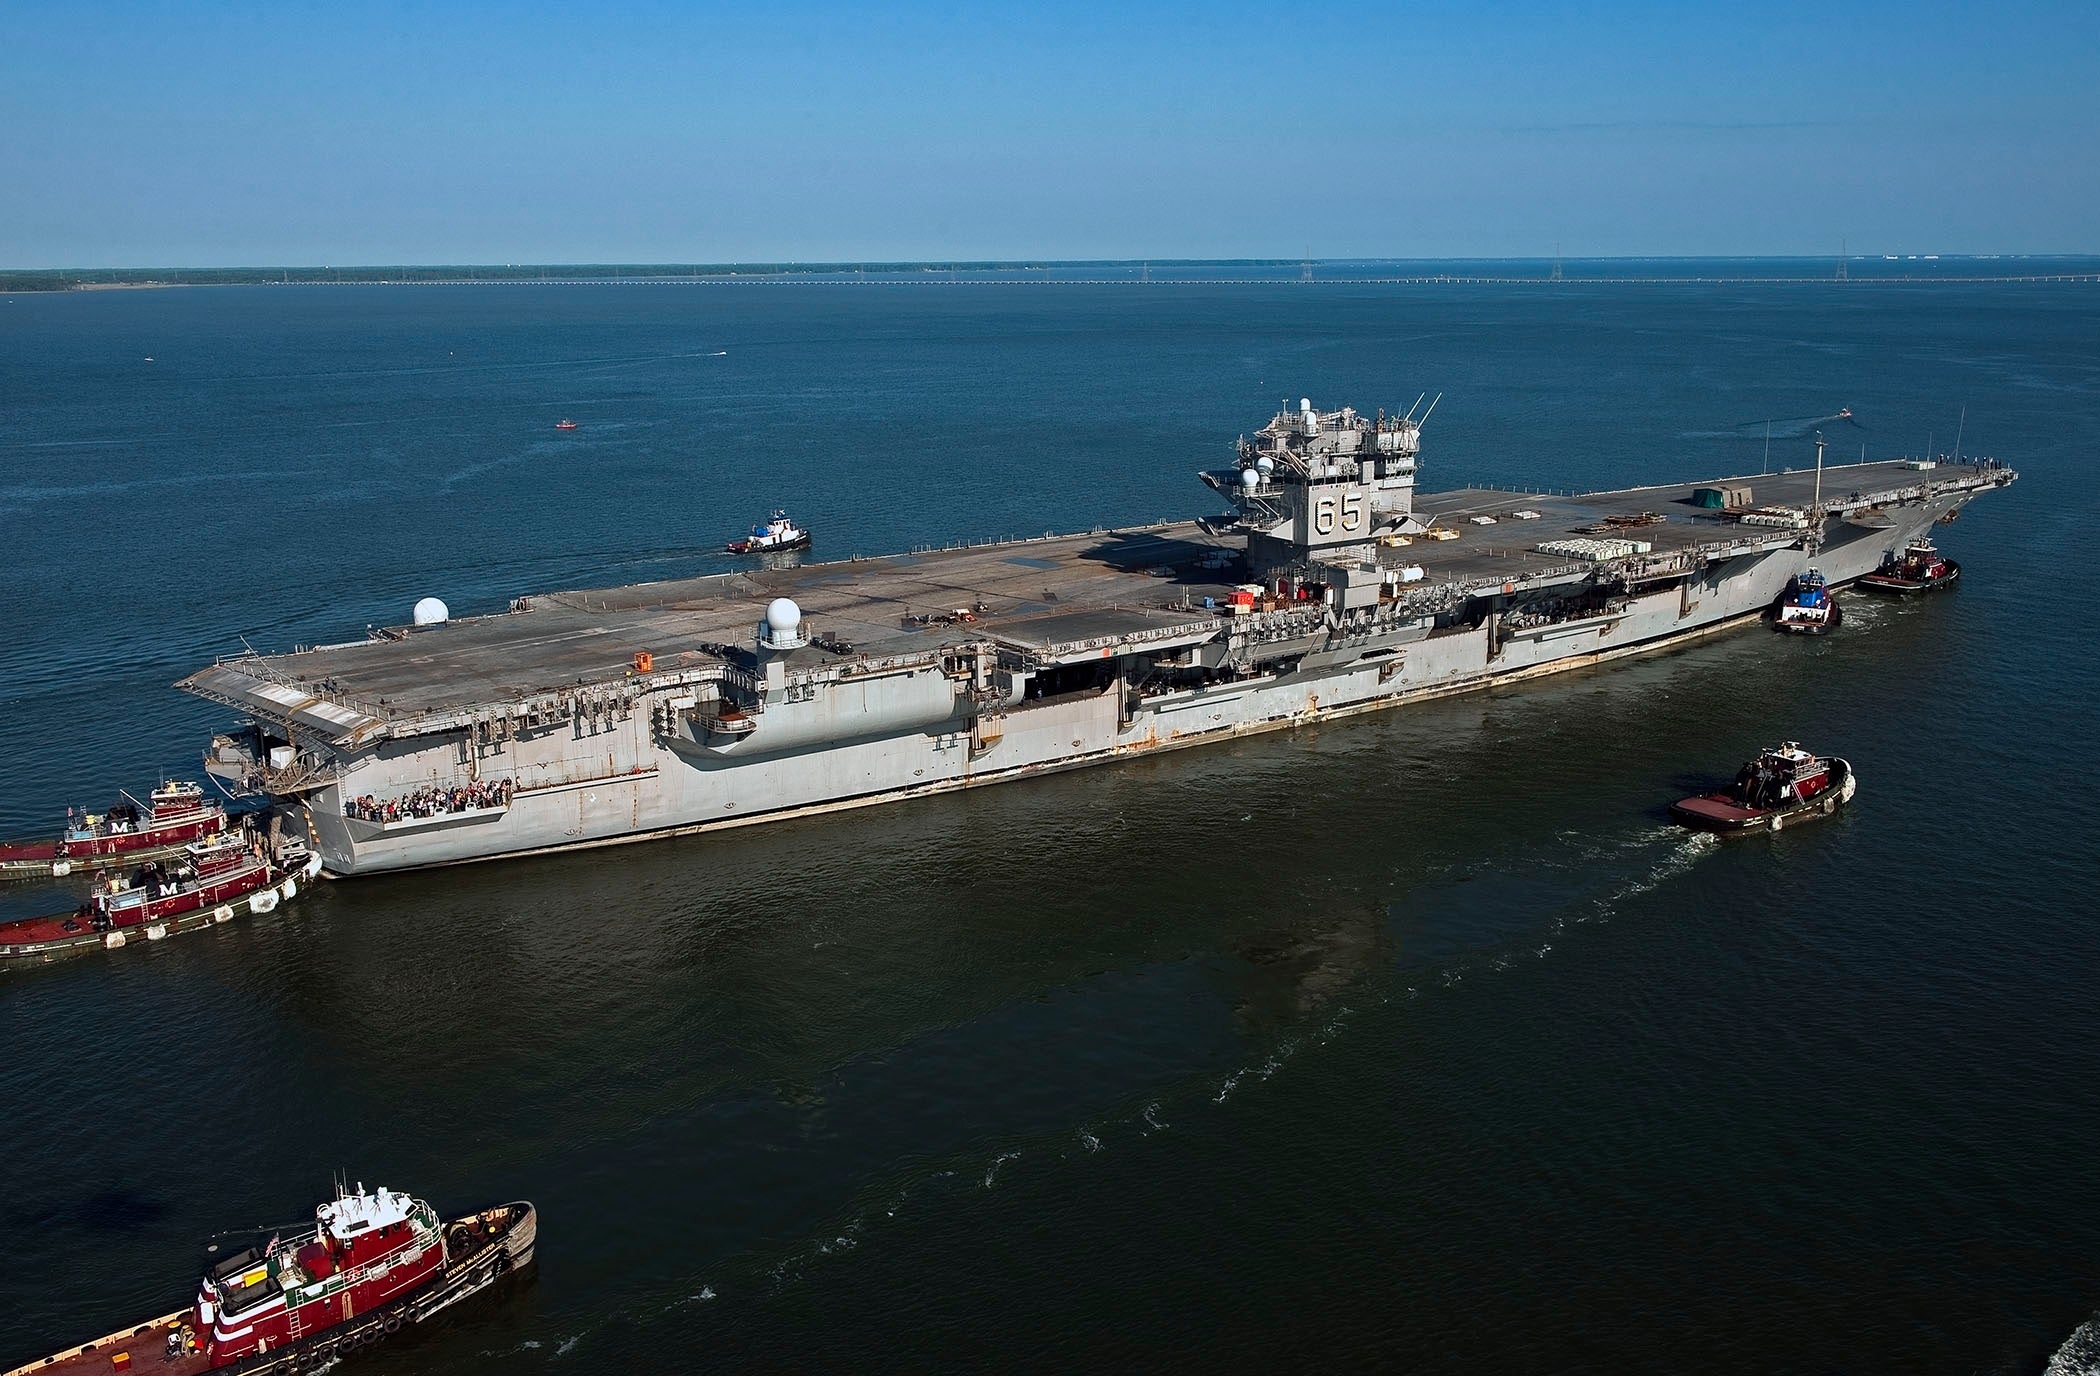 The aircraft carrier USS Enterprise (CVN 65) makes its final voyage to Newport News Shipbuilding. The first nuclear-powered aircraft carrier will be dismantled at the shipyard prior to the scheduled commissioning of the next aircraft carrier Enterprise (CVN 80). (U.S. Navy photo courtesy of Huntington Ingalls Industries by John Whalen/Released)